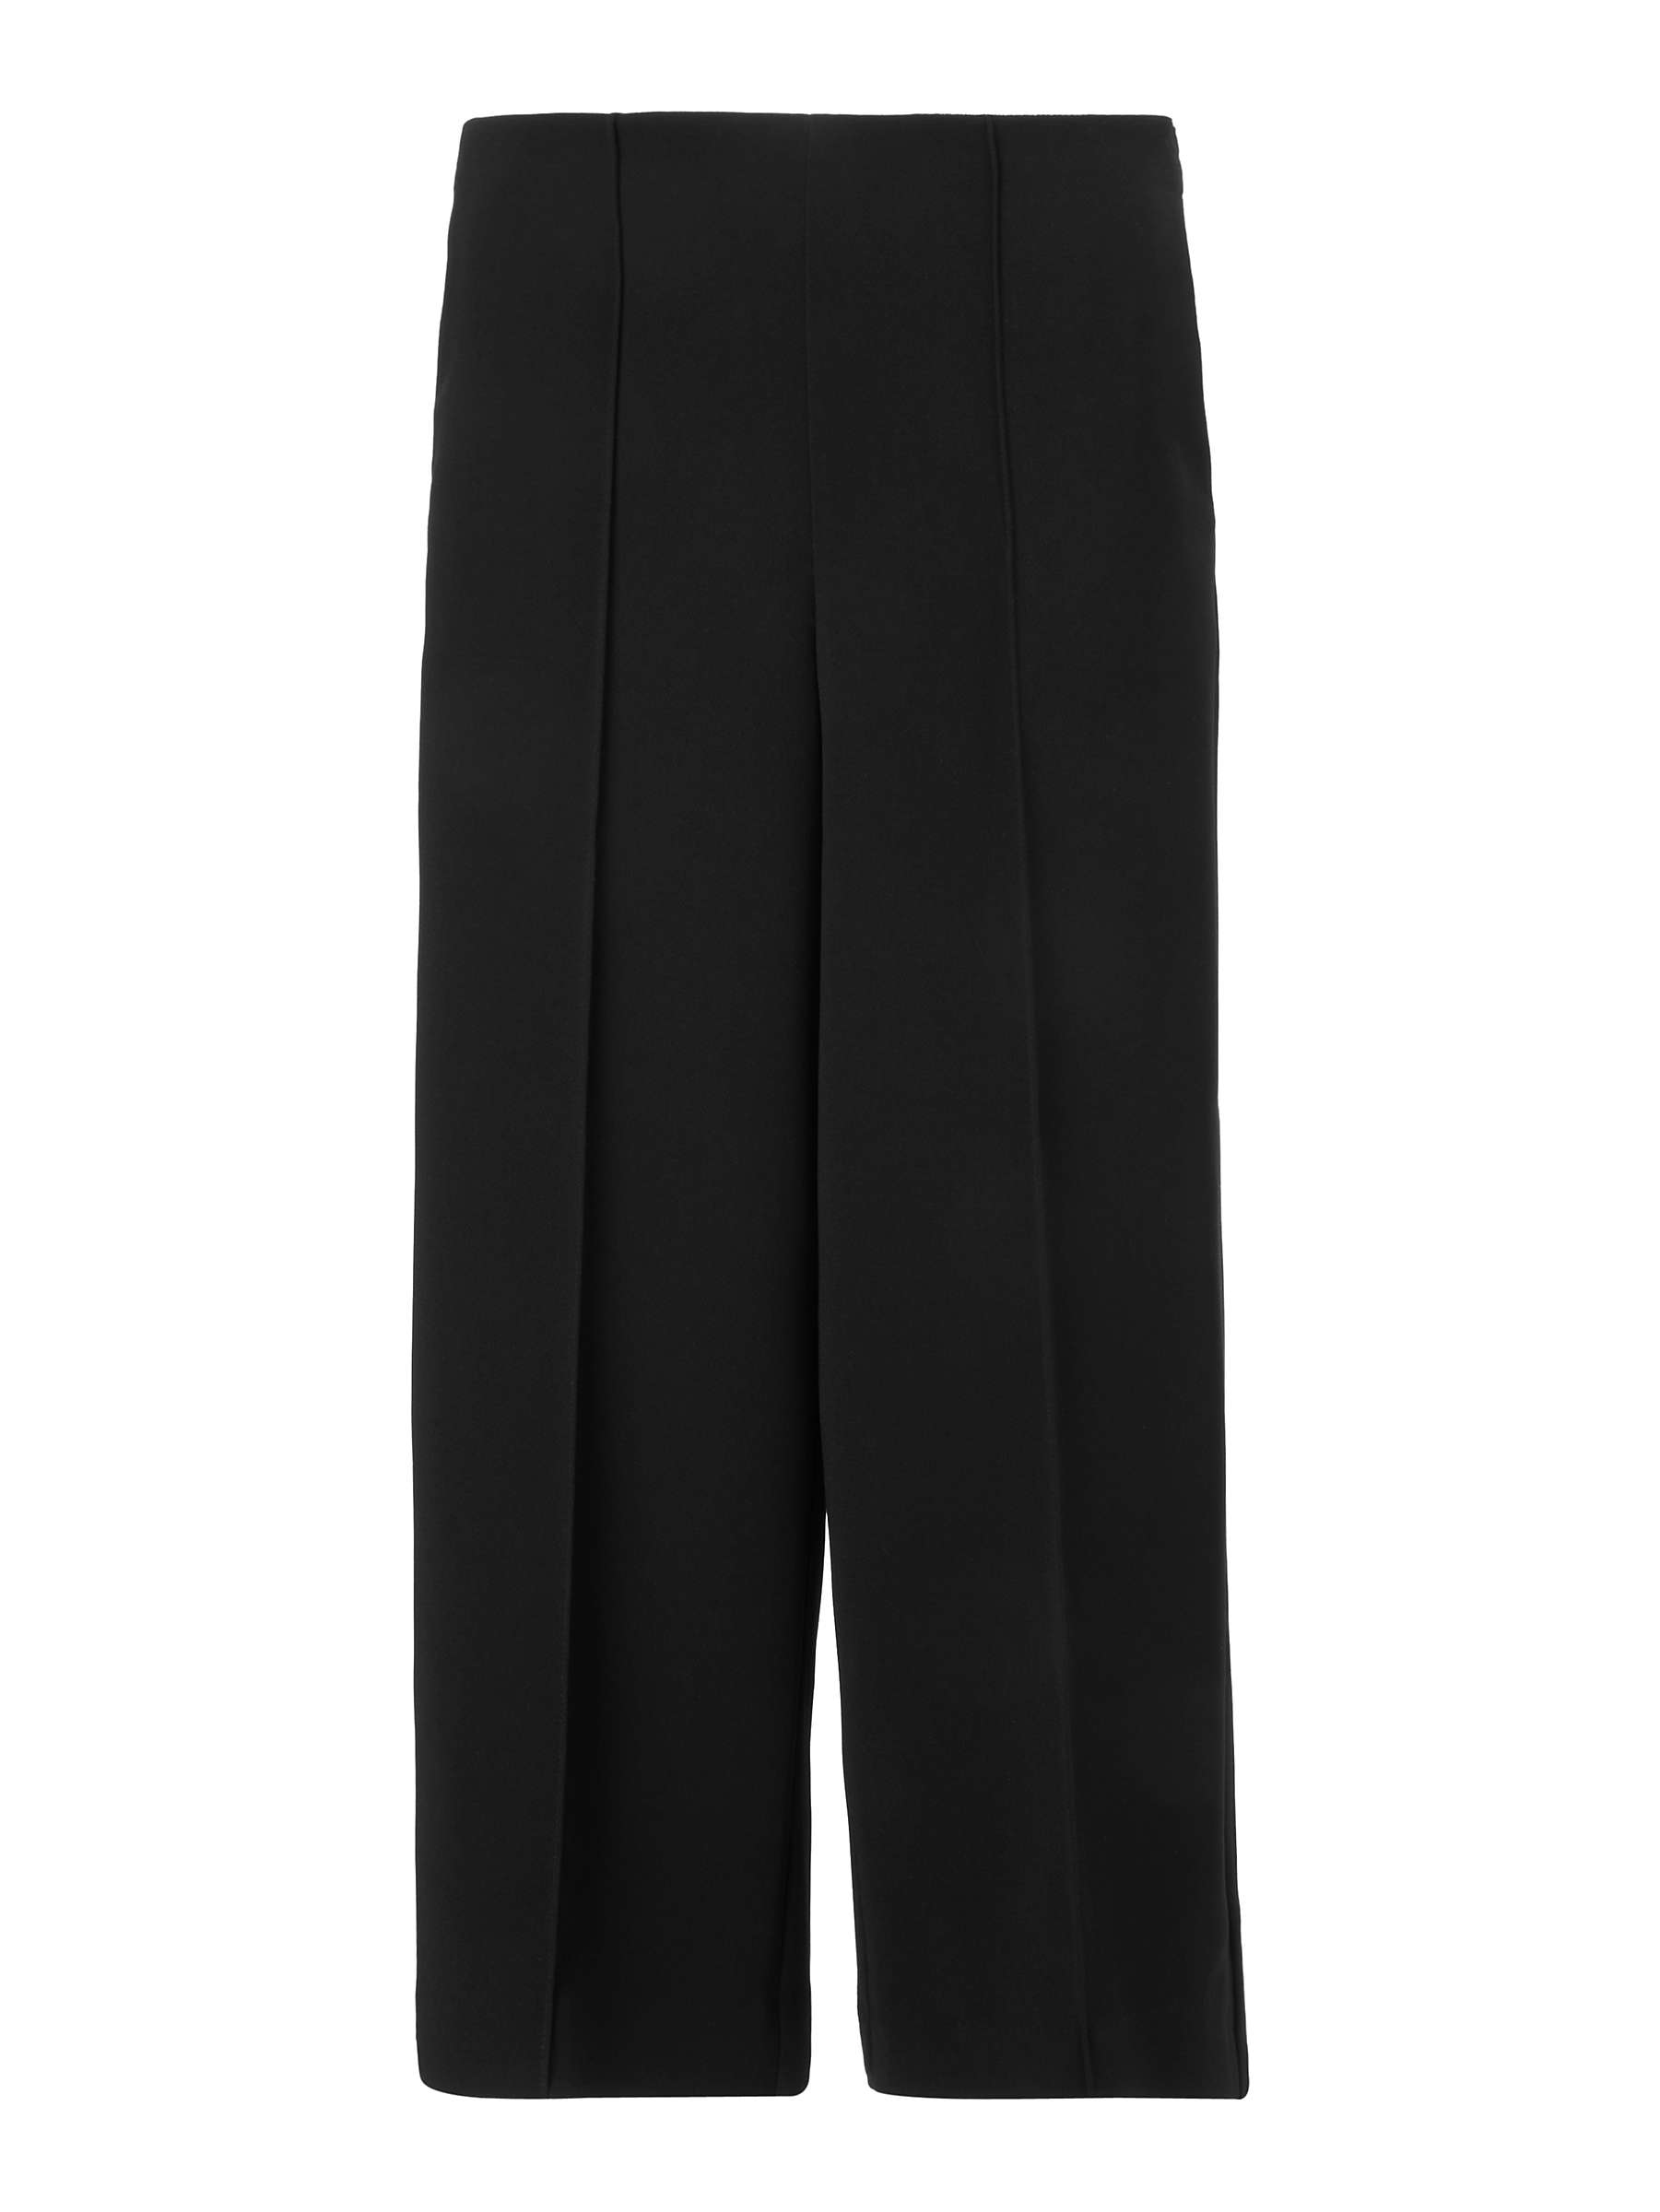 Kin Twill Wide Leg Cropped Trousers, Black at John Lewis & Partners